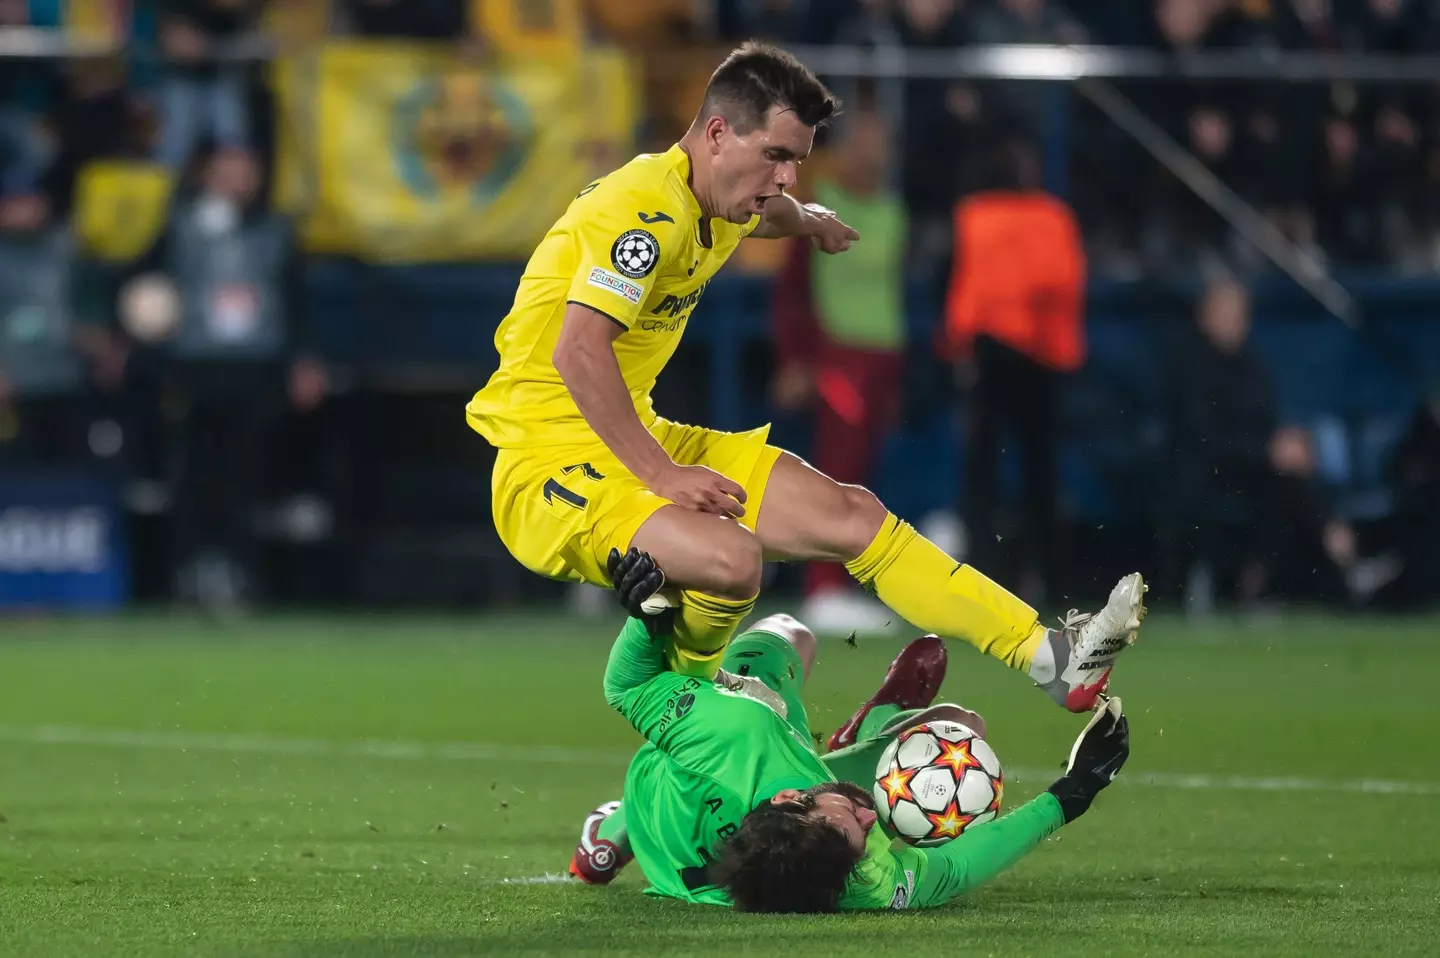 Did Alisson take out Lo Celso? Image: PA Images